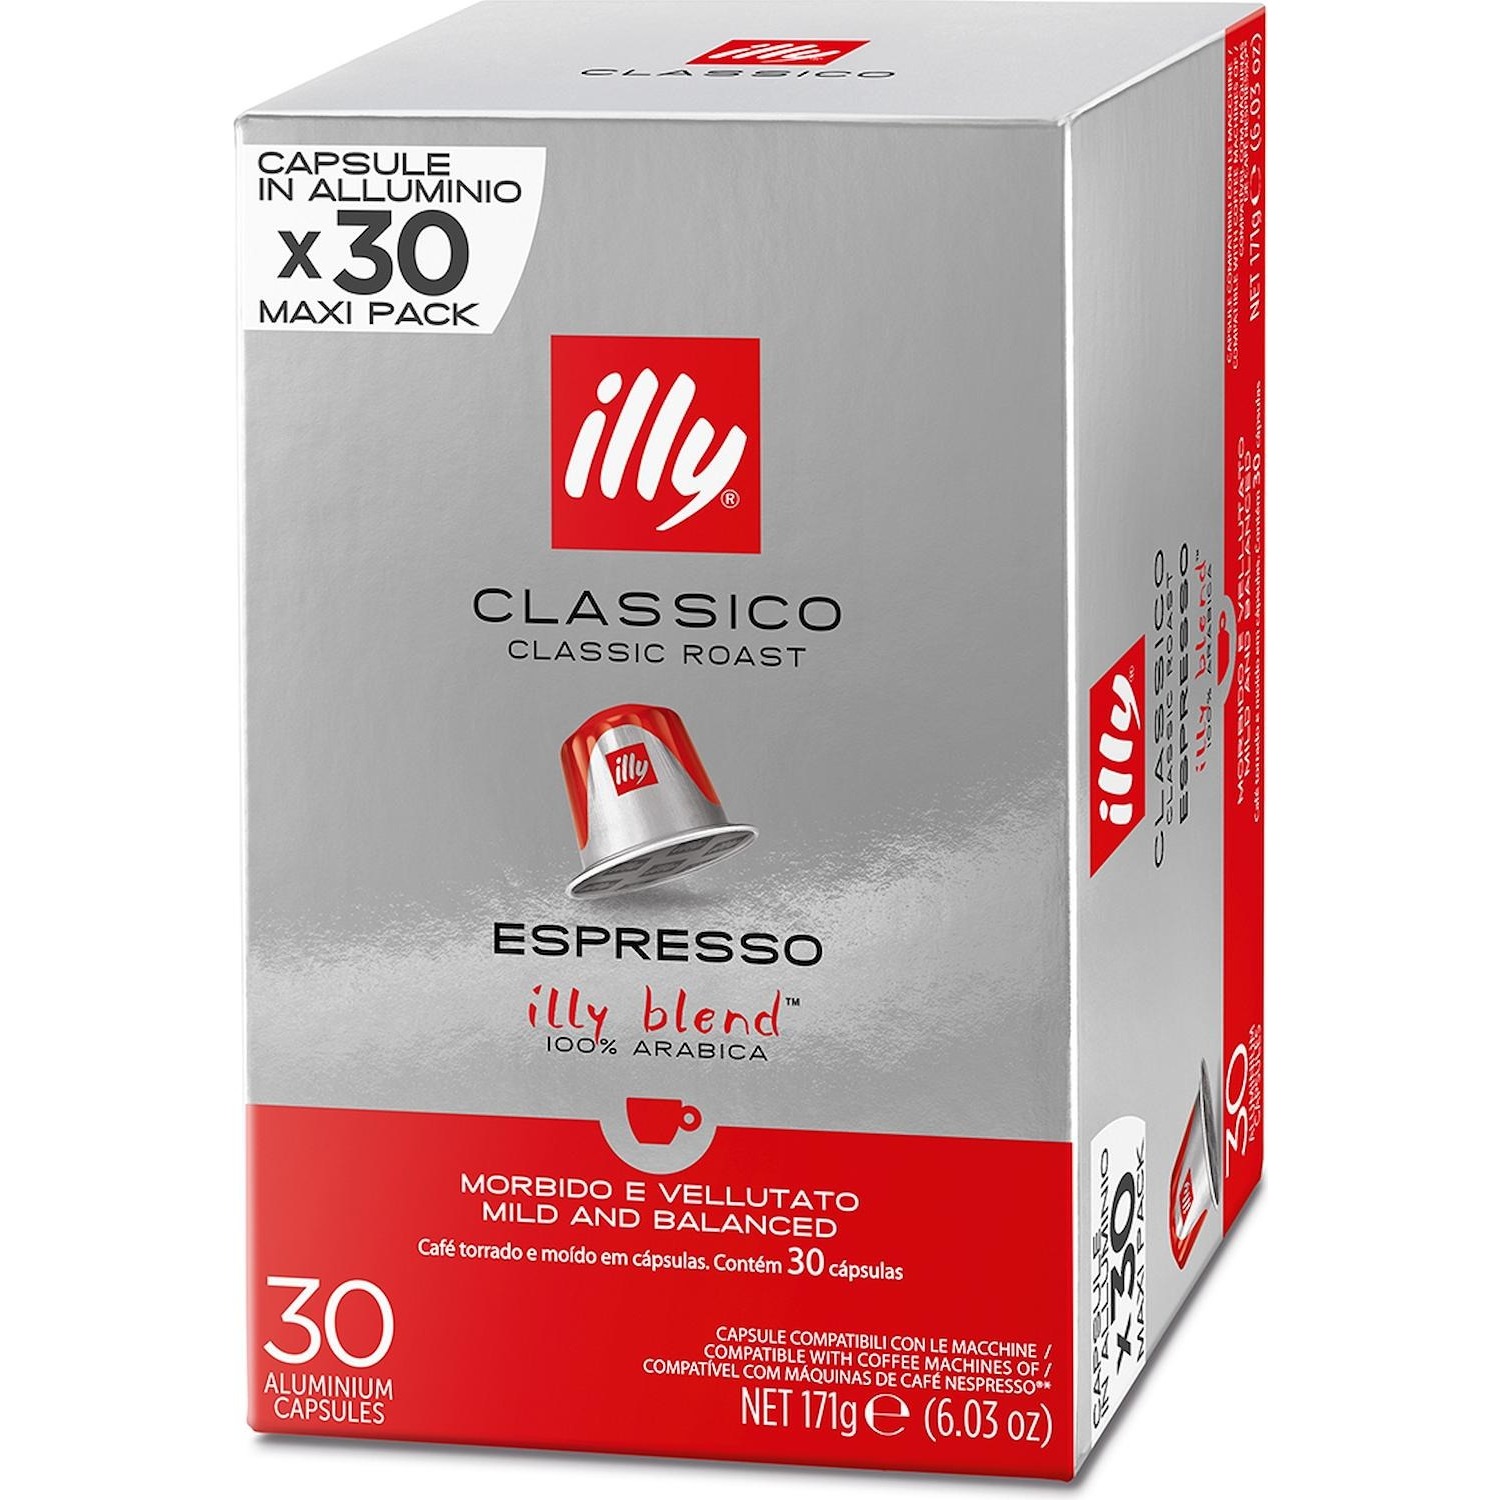 https://images.dimostore.it/1500/capsule-caff-illy-classico-30pz-compatibile-nespresso-capill24660.jpg